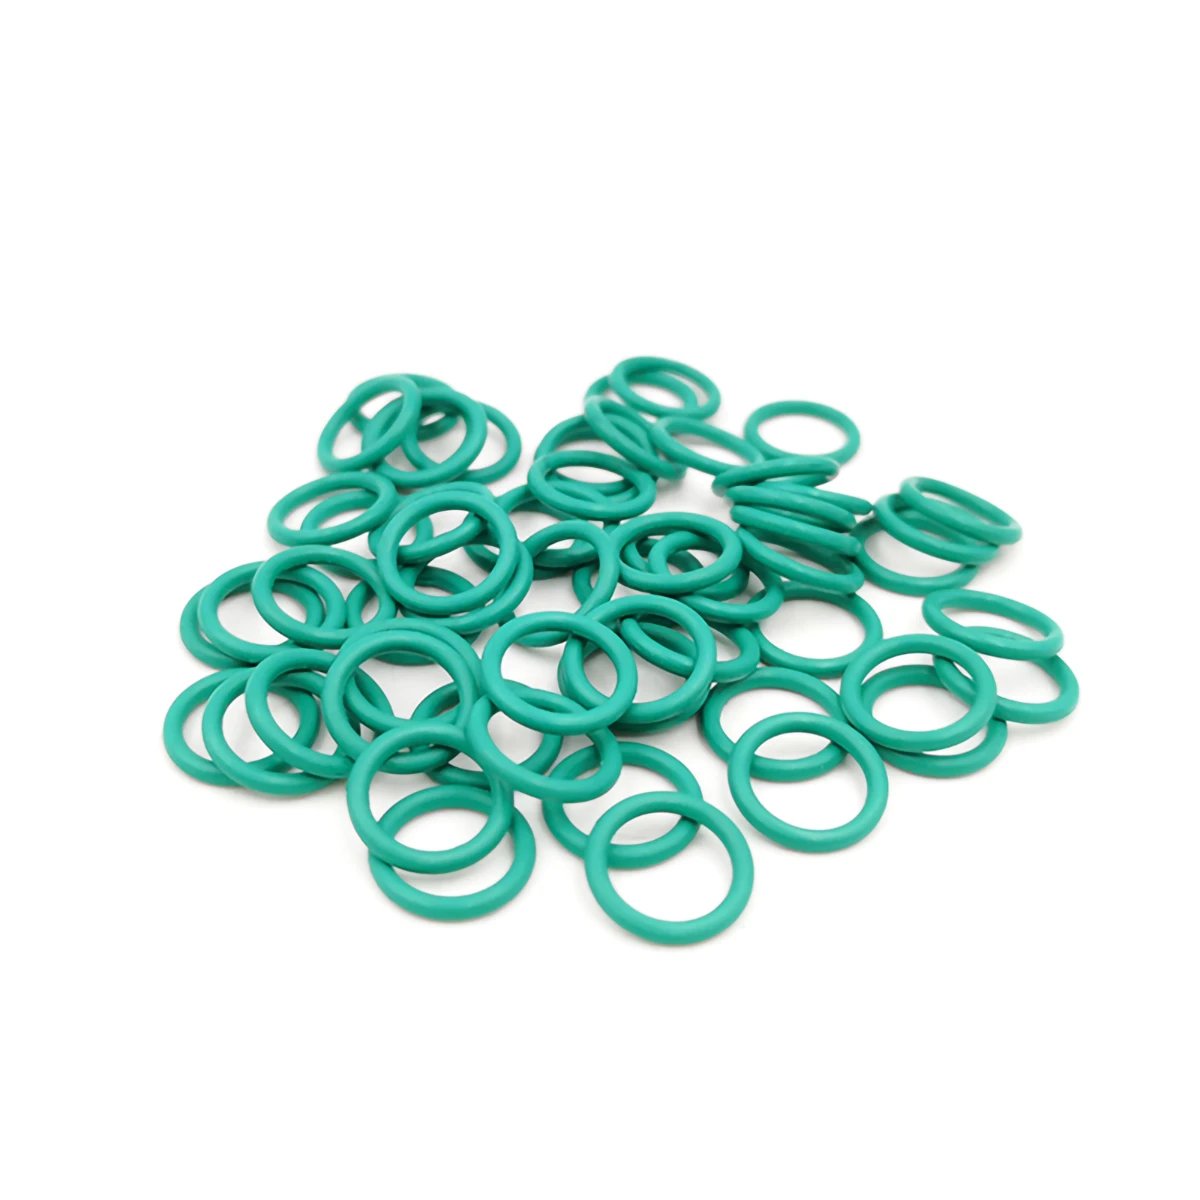 Fluorine Rubber O-Rings FKM Green 2.65 ID6-38.7 Resistant Oil Seal Gasket Washer